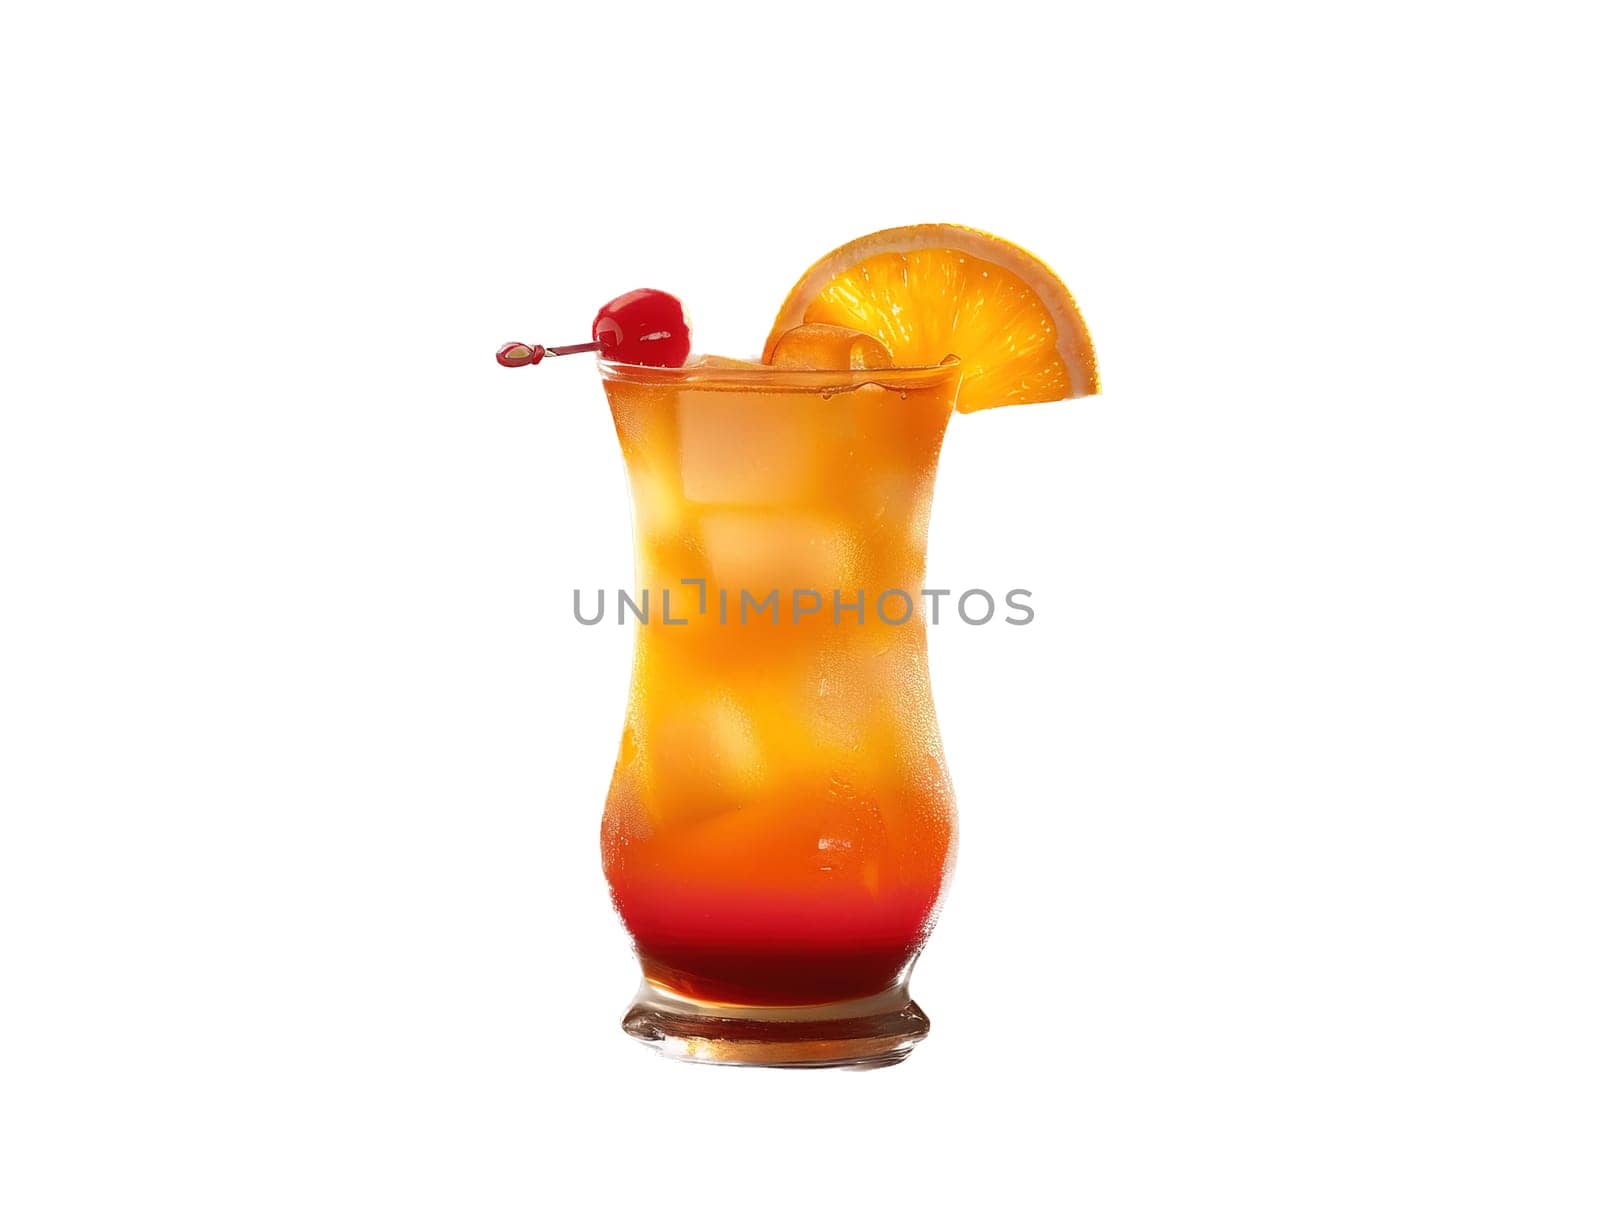 Delicious Tequila Sunrise cocktail photography, explosion flavors, studio lighting, studio background, well-lit, vibrant colors, sharp-focus, high-quality, artistic, unique. Tequila Sunrise Cocktail in vintage glass by mr-tigga